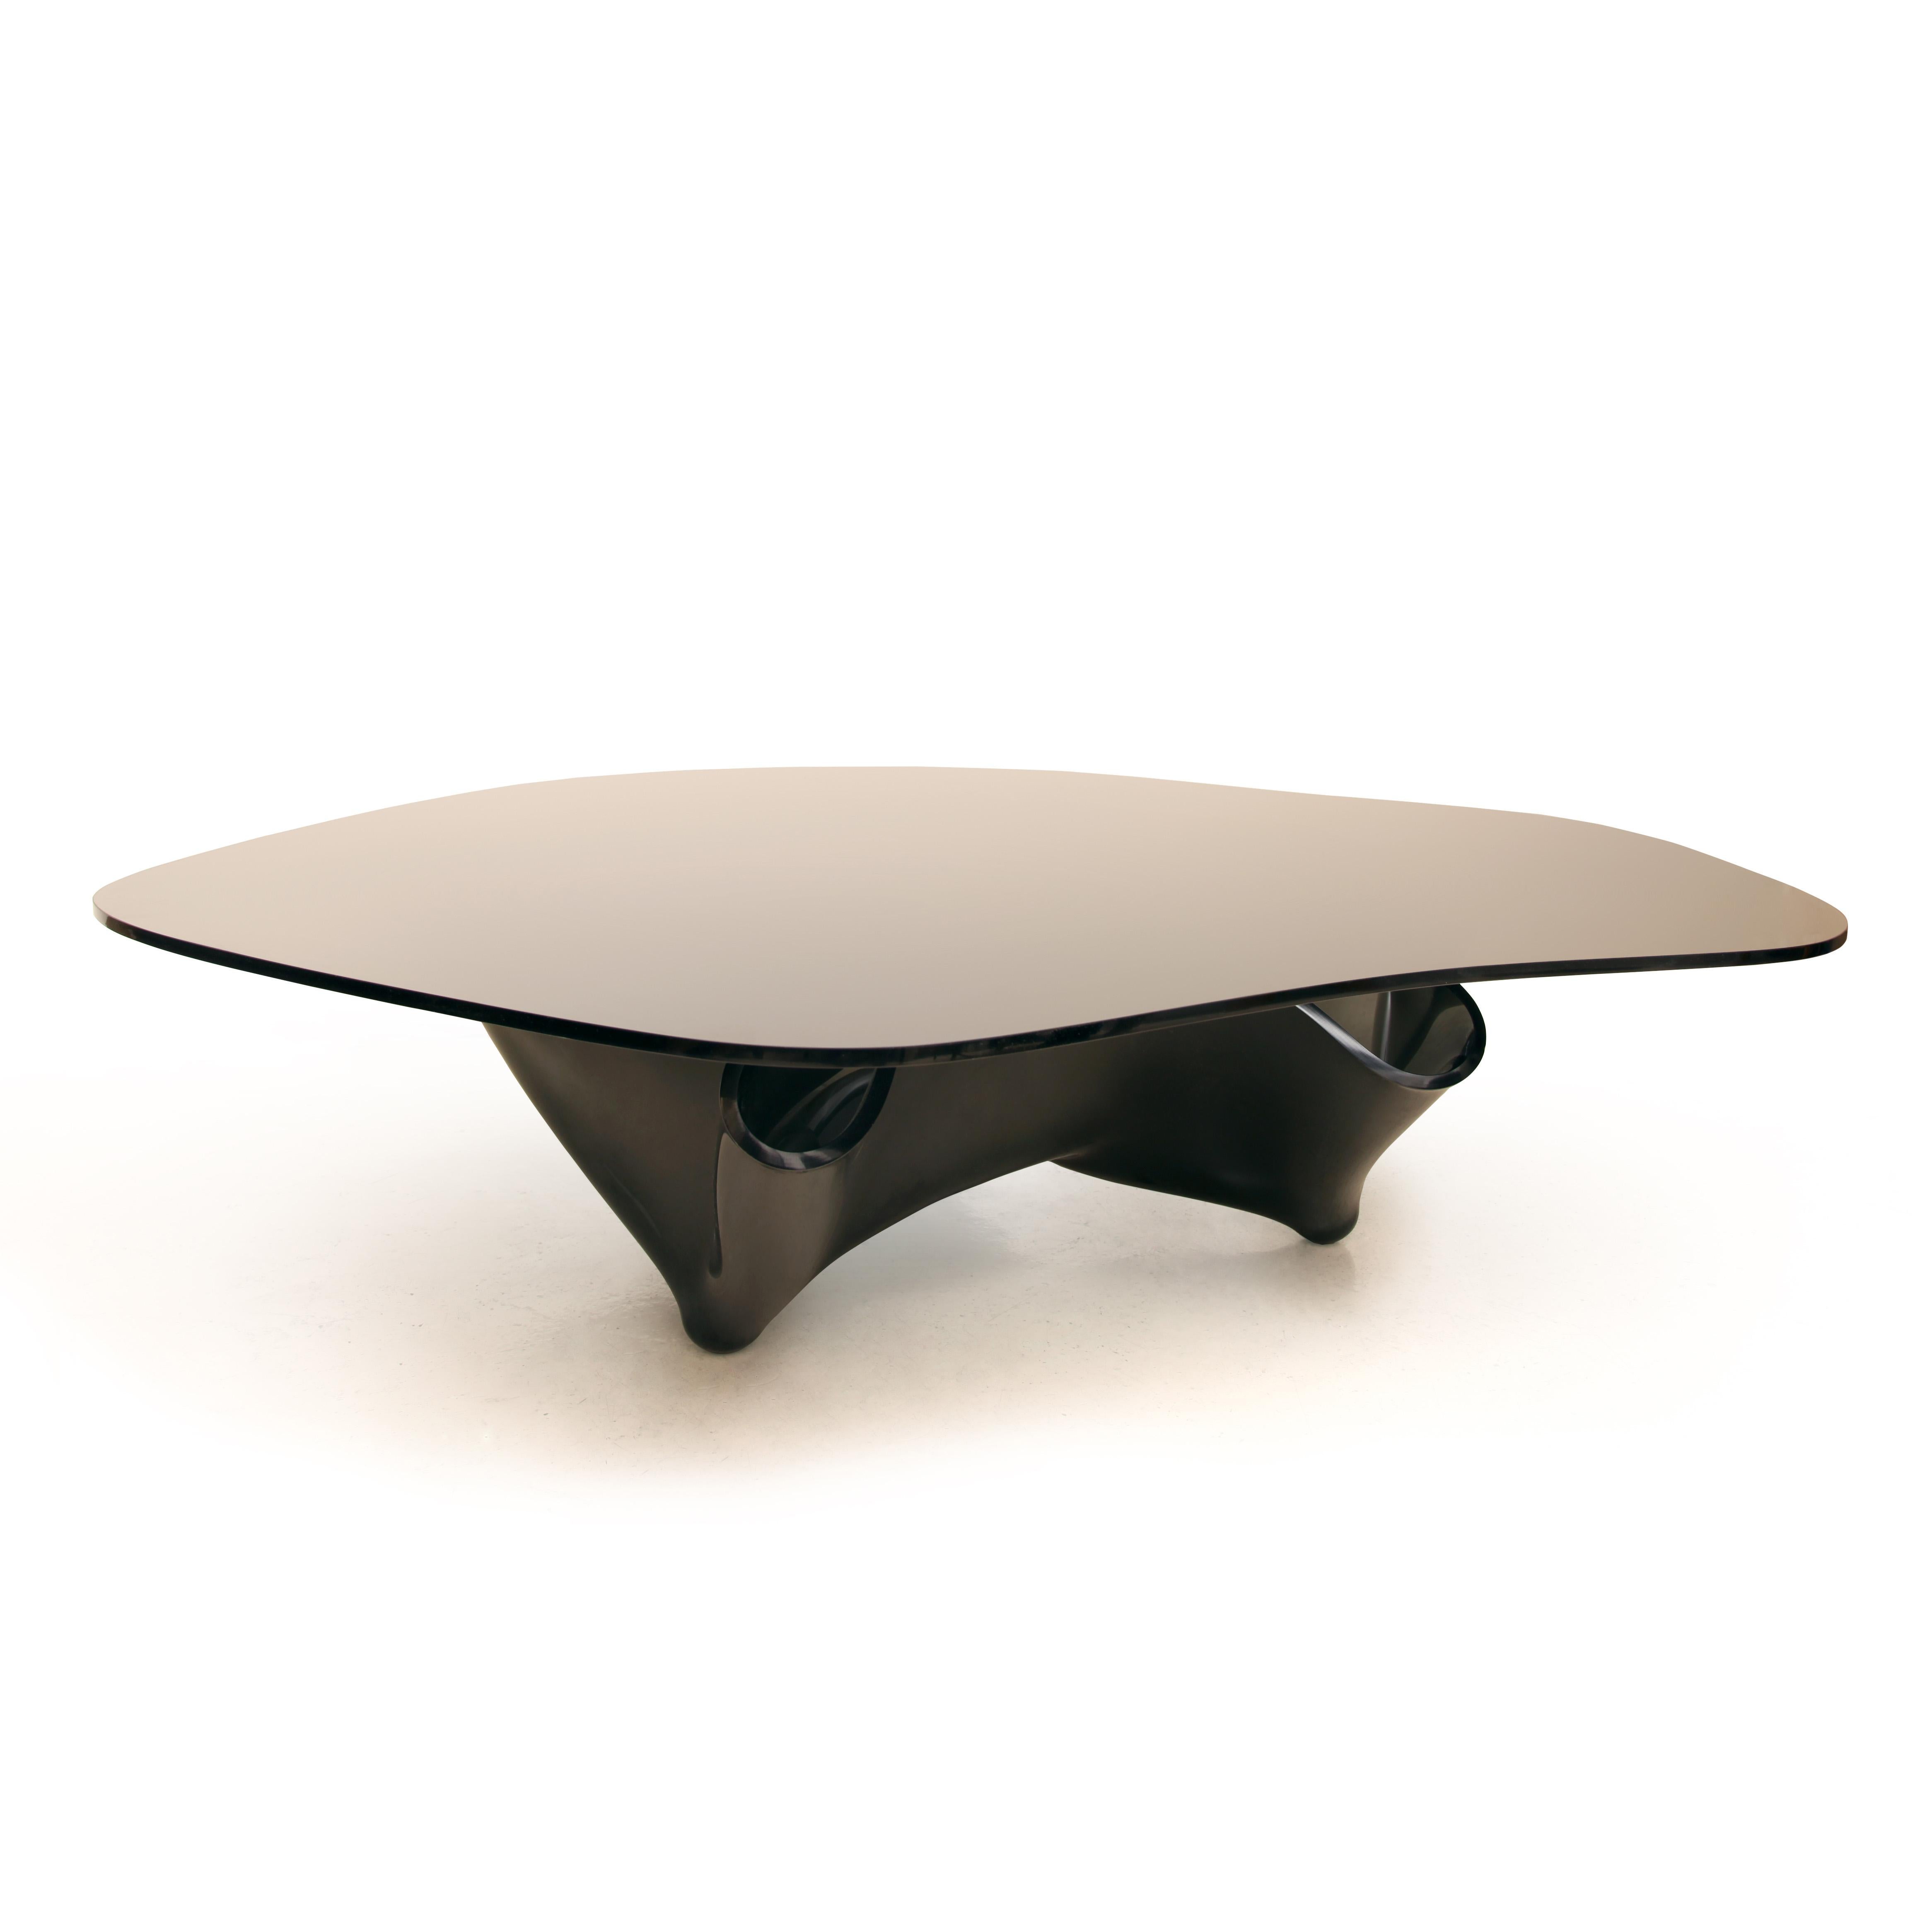 A monumental and rare black glass coffee table, with handkerchief-shaped base and irregular organic shape glass top. Imported from the USA to London, originally for an estate in Hyde Park. This piece was produced prior to 1992, when Fyfe owned Lumen